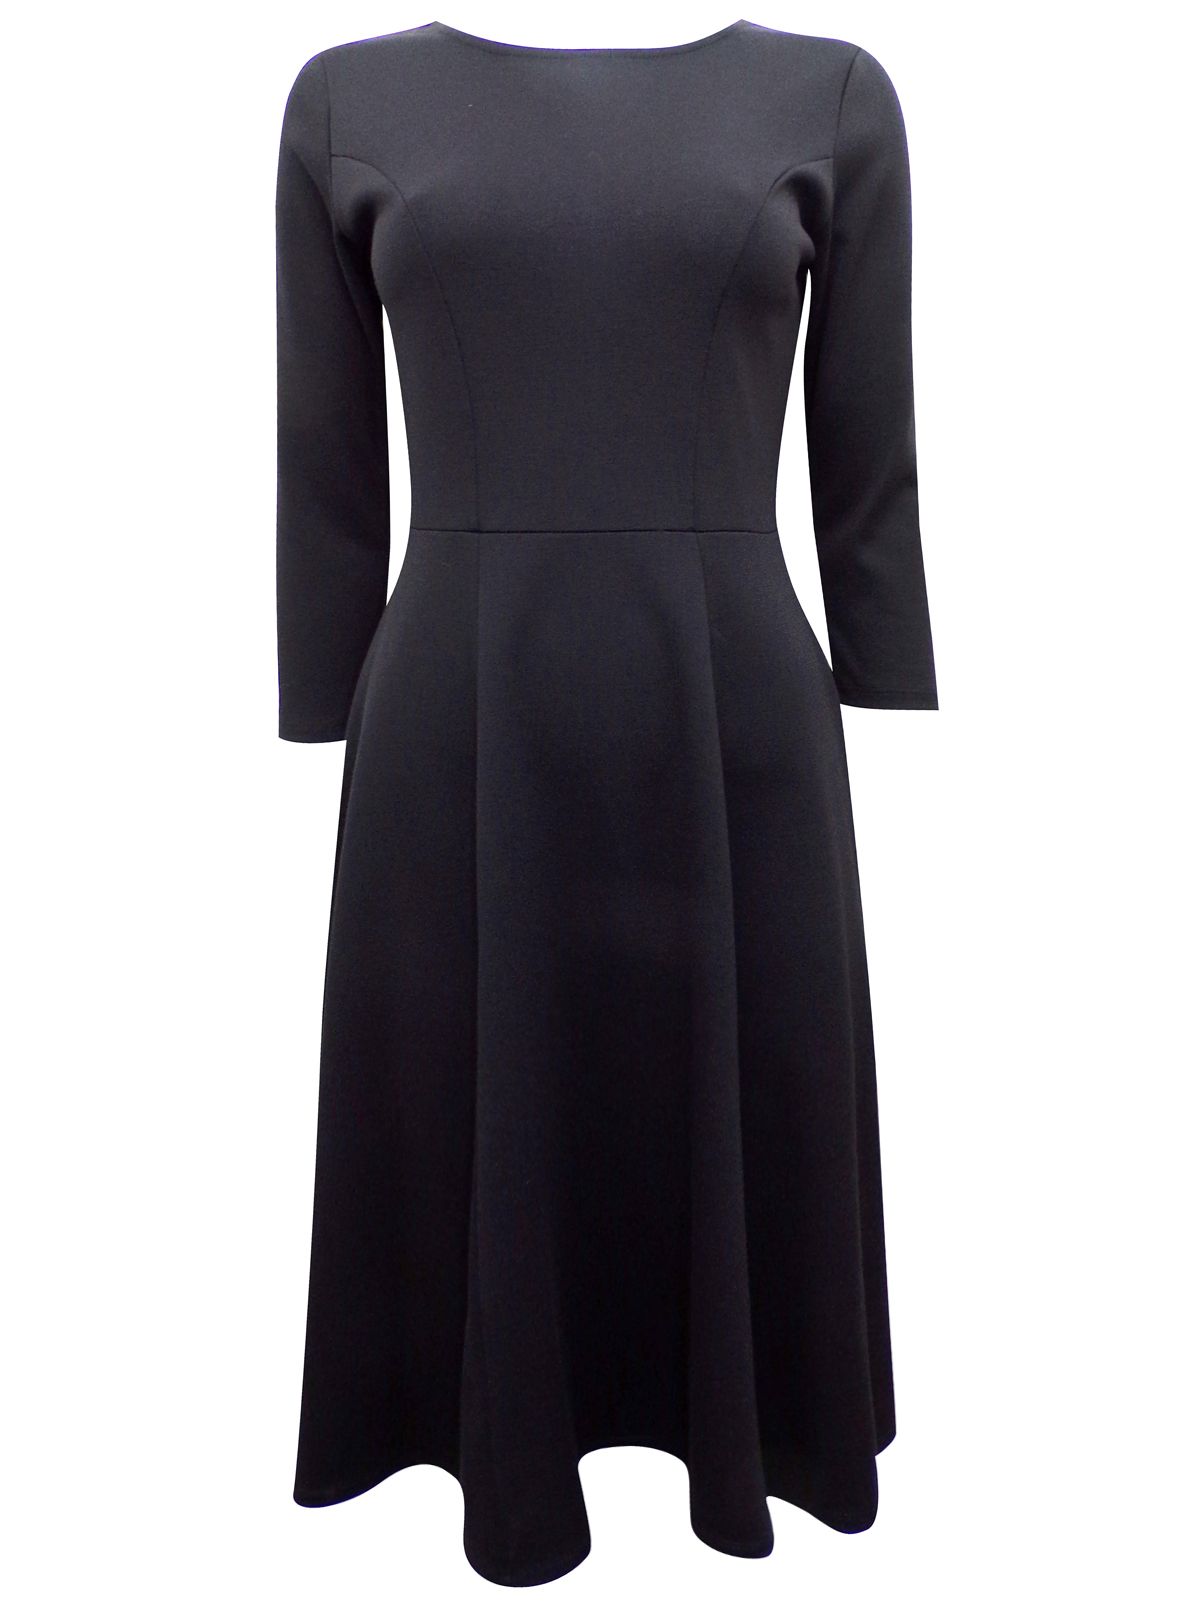 Beales - - Beales BLACK Panelled Fit & Flare Dress - Size 10 to 16